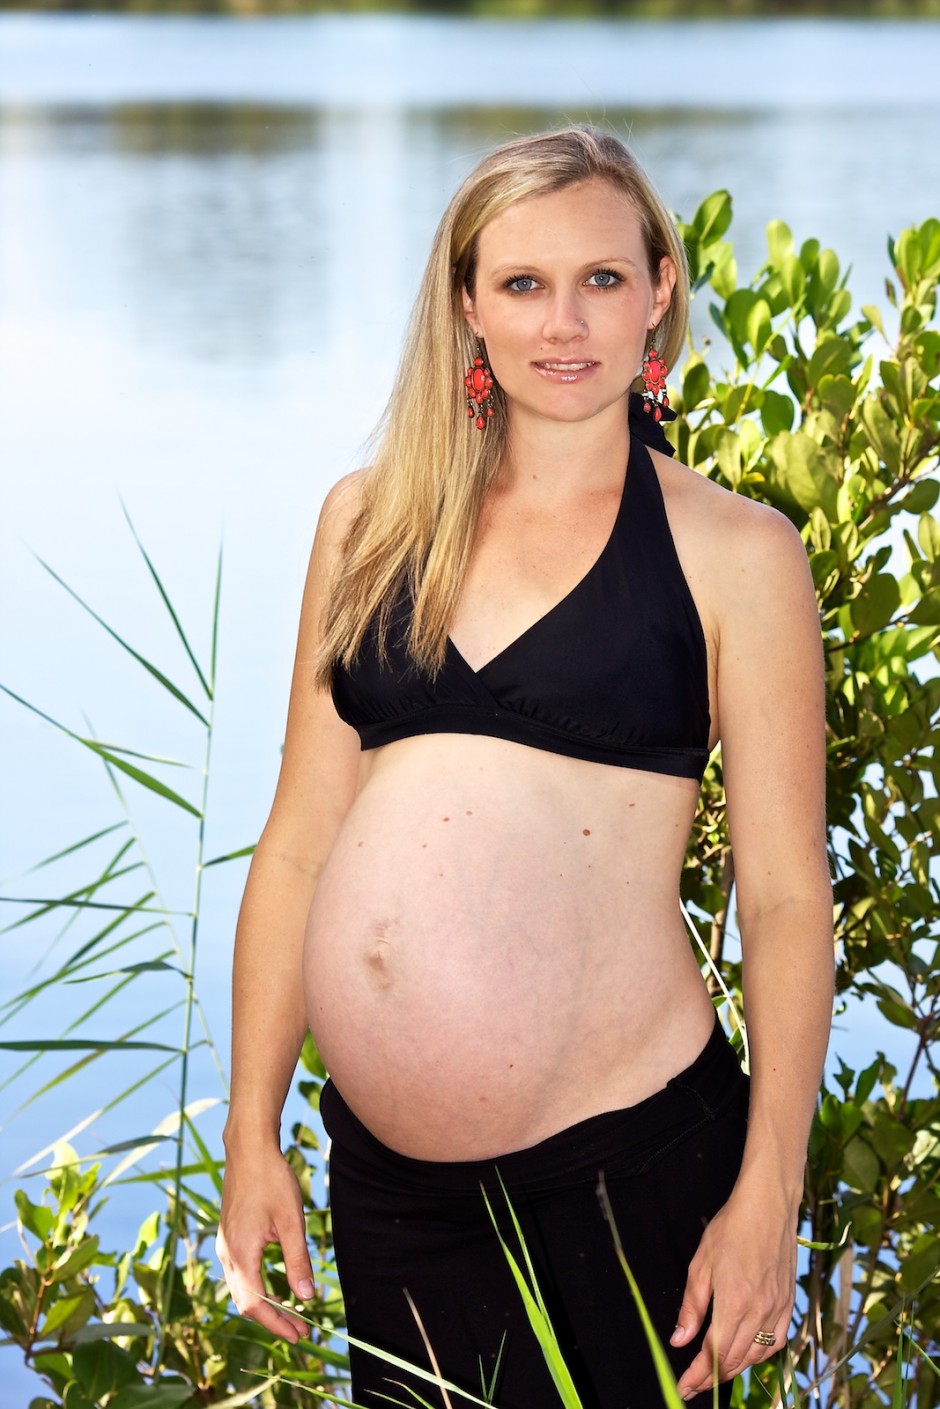 Maternity by the river